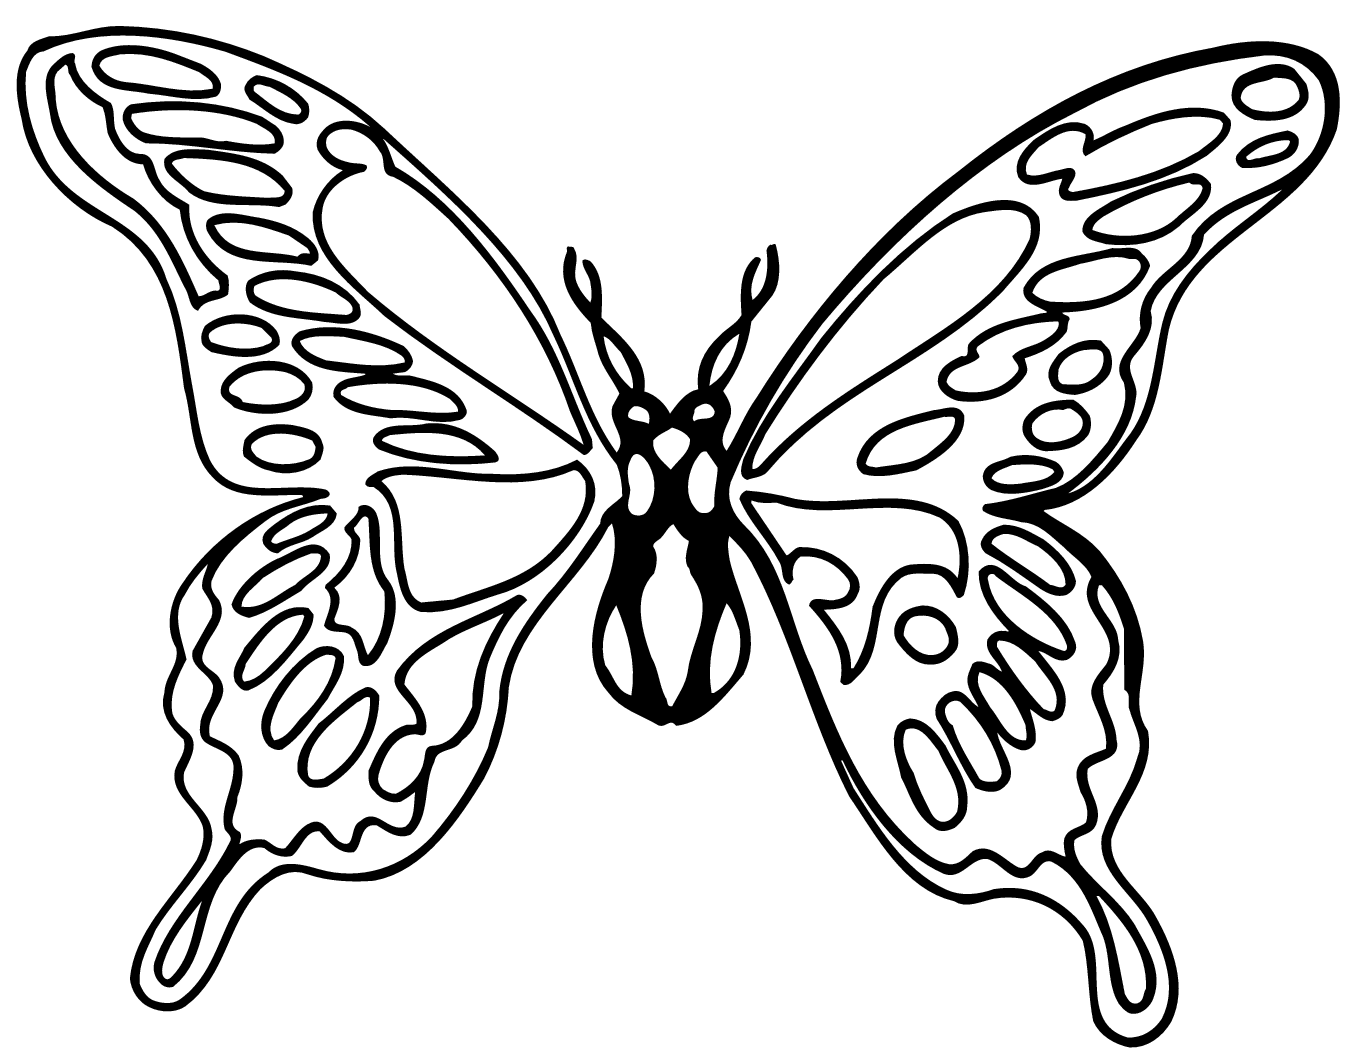 Monarch butterfly black and white clipart clipart